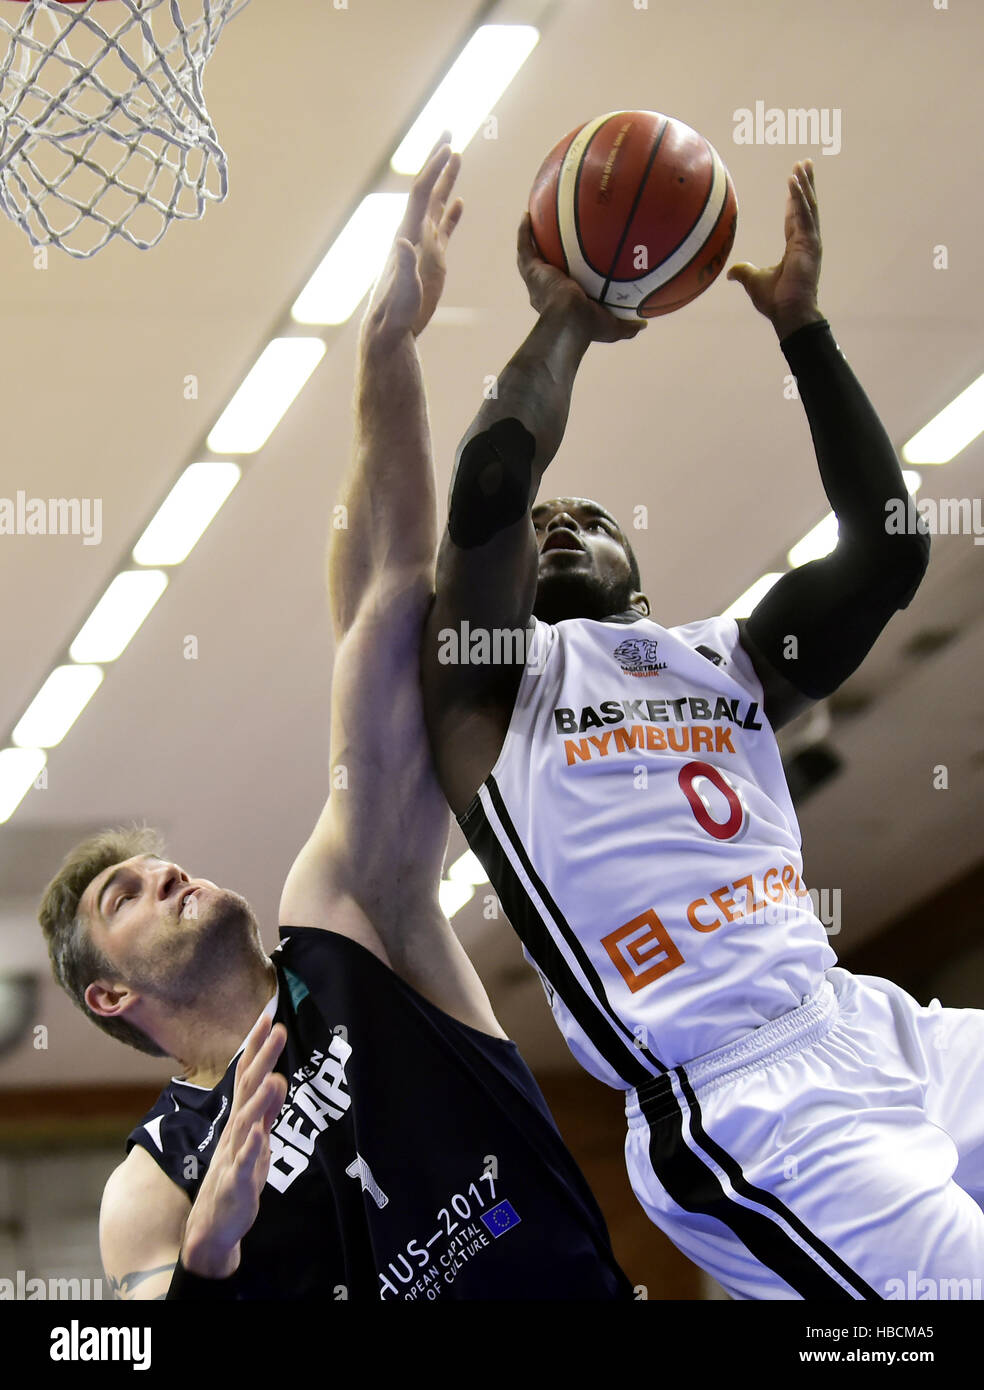 Nymburk, Czech Republic. 06th Dec, 2016. From left: Chris Christoffersen of Aarhus and Bryon Allen of Nymburk in action during the Men's Basketball Champions League group 8th round game: Nymburk vs Aarhus in Nymburk, Czech Republic, December 6, 2016. © Josef Vostarek/CTK Photo/Alamy Live News Stock Photo